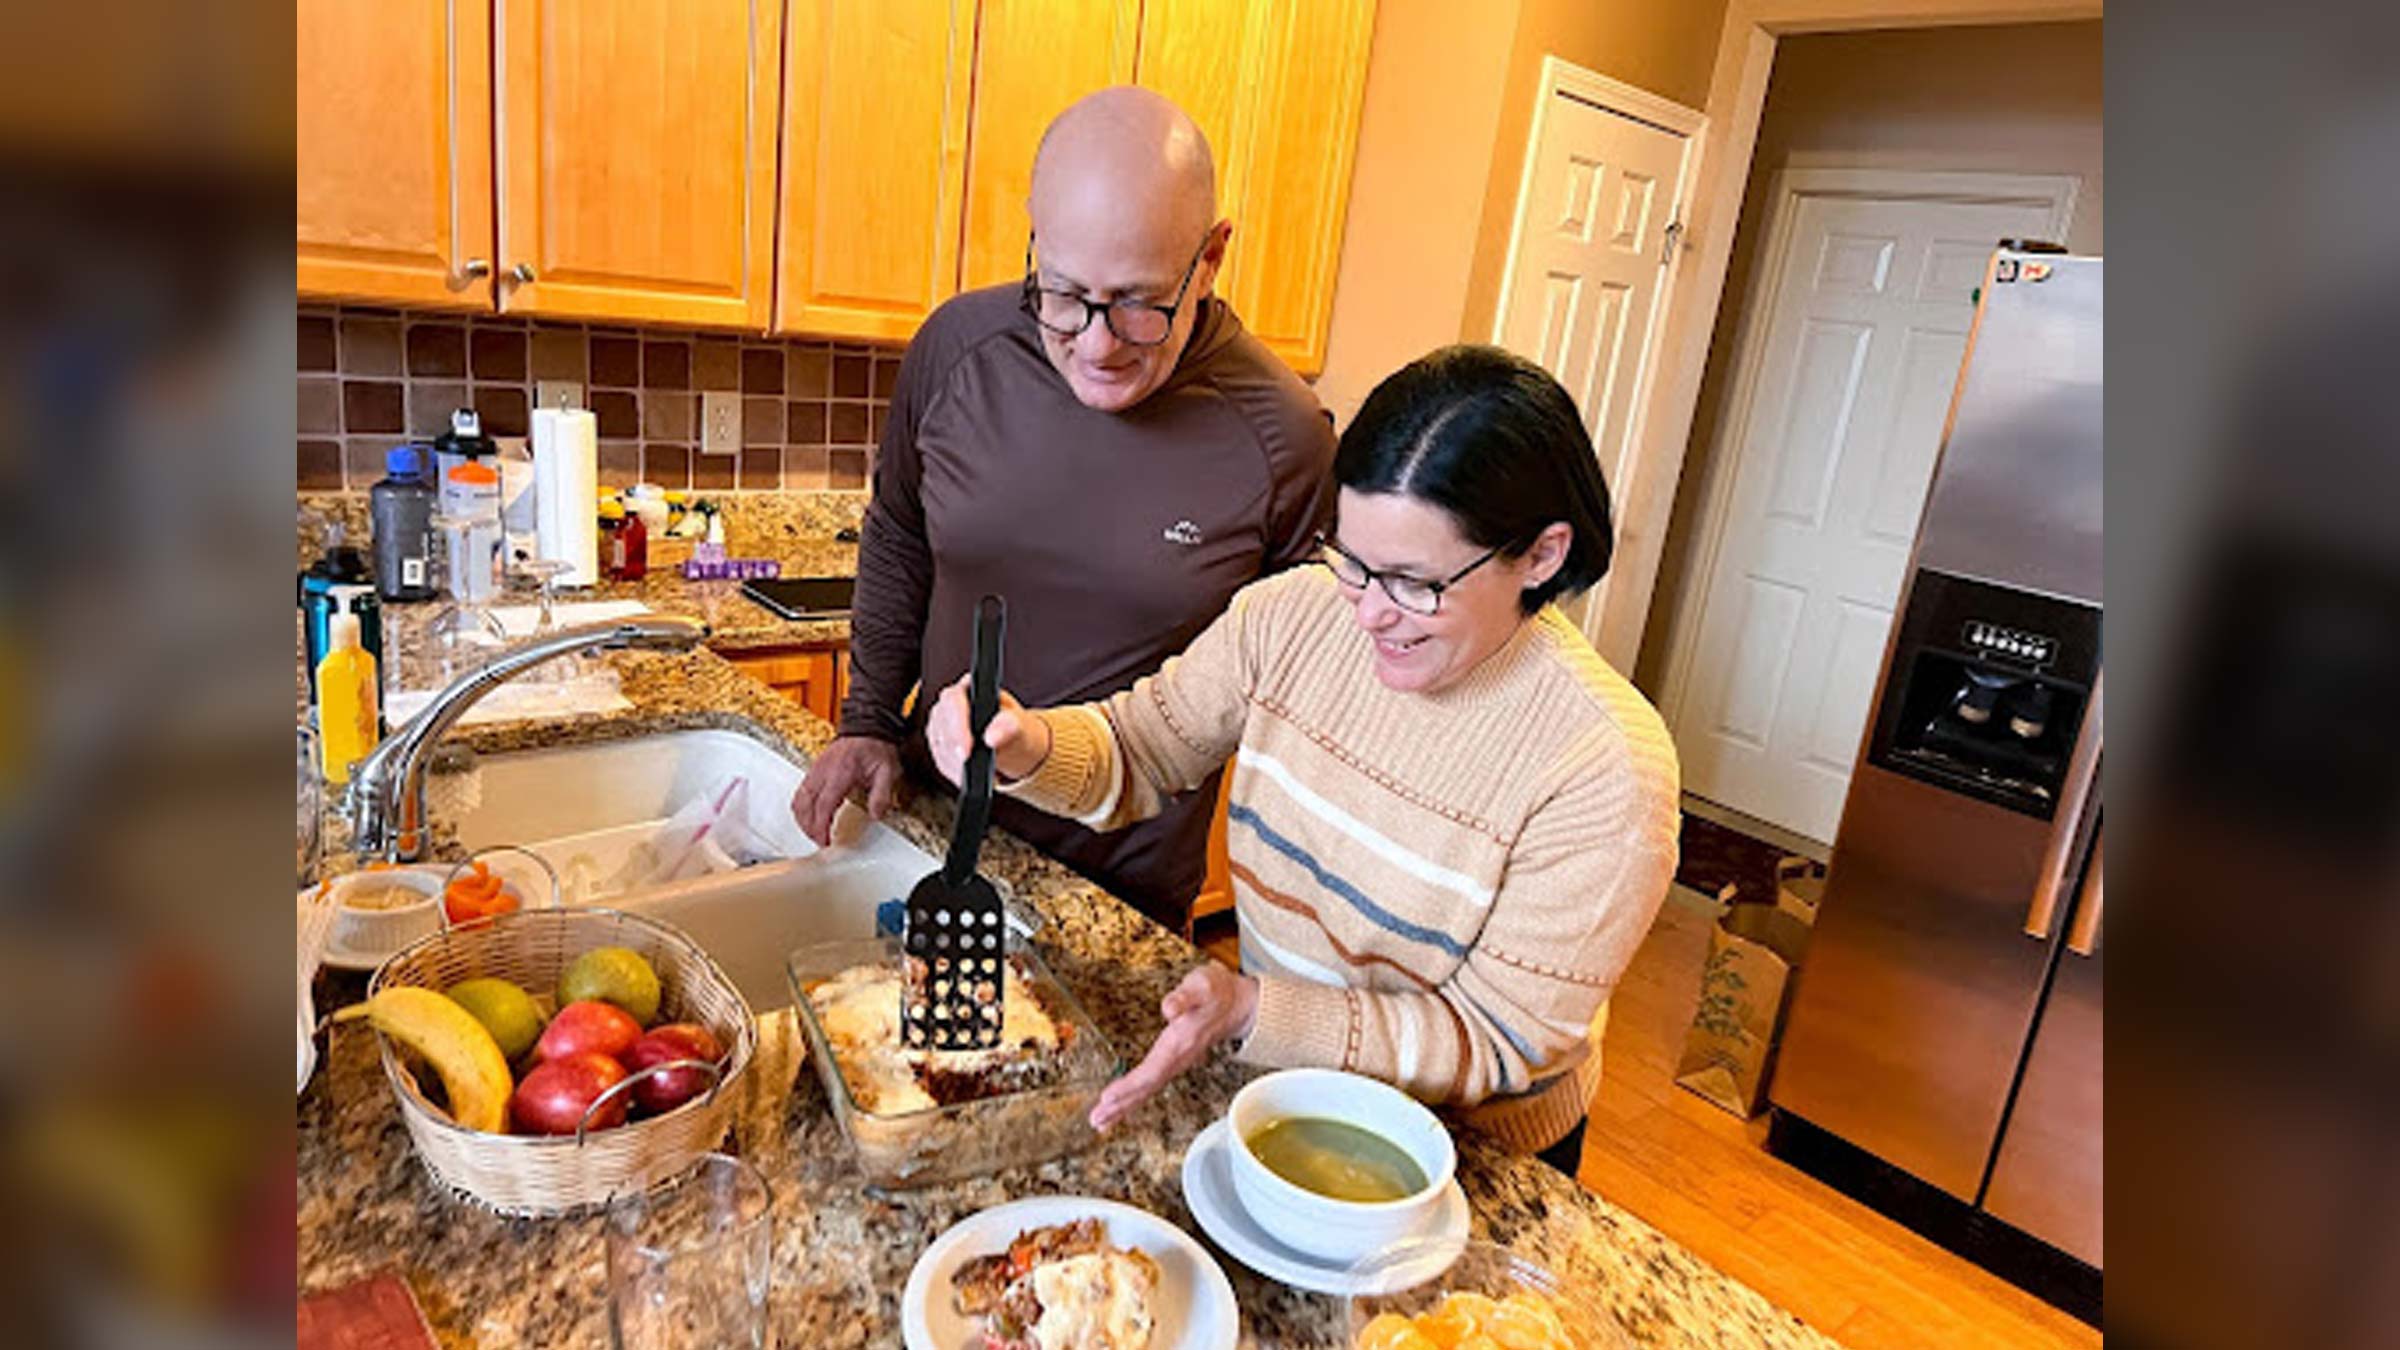 Angel Kowalski, a cancer survivor, prepares meals for the week with his wife.